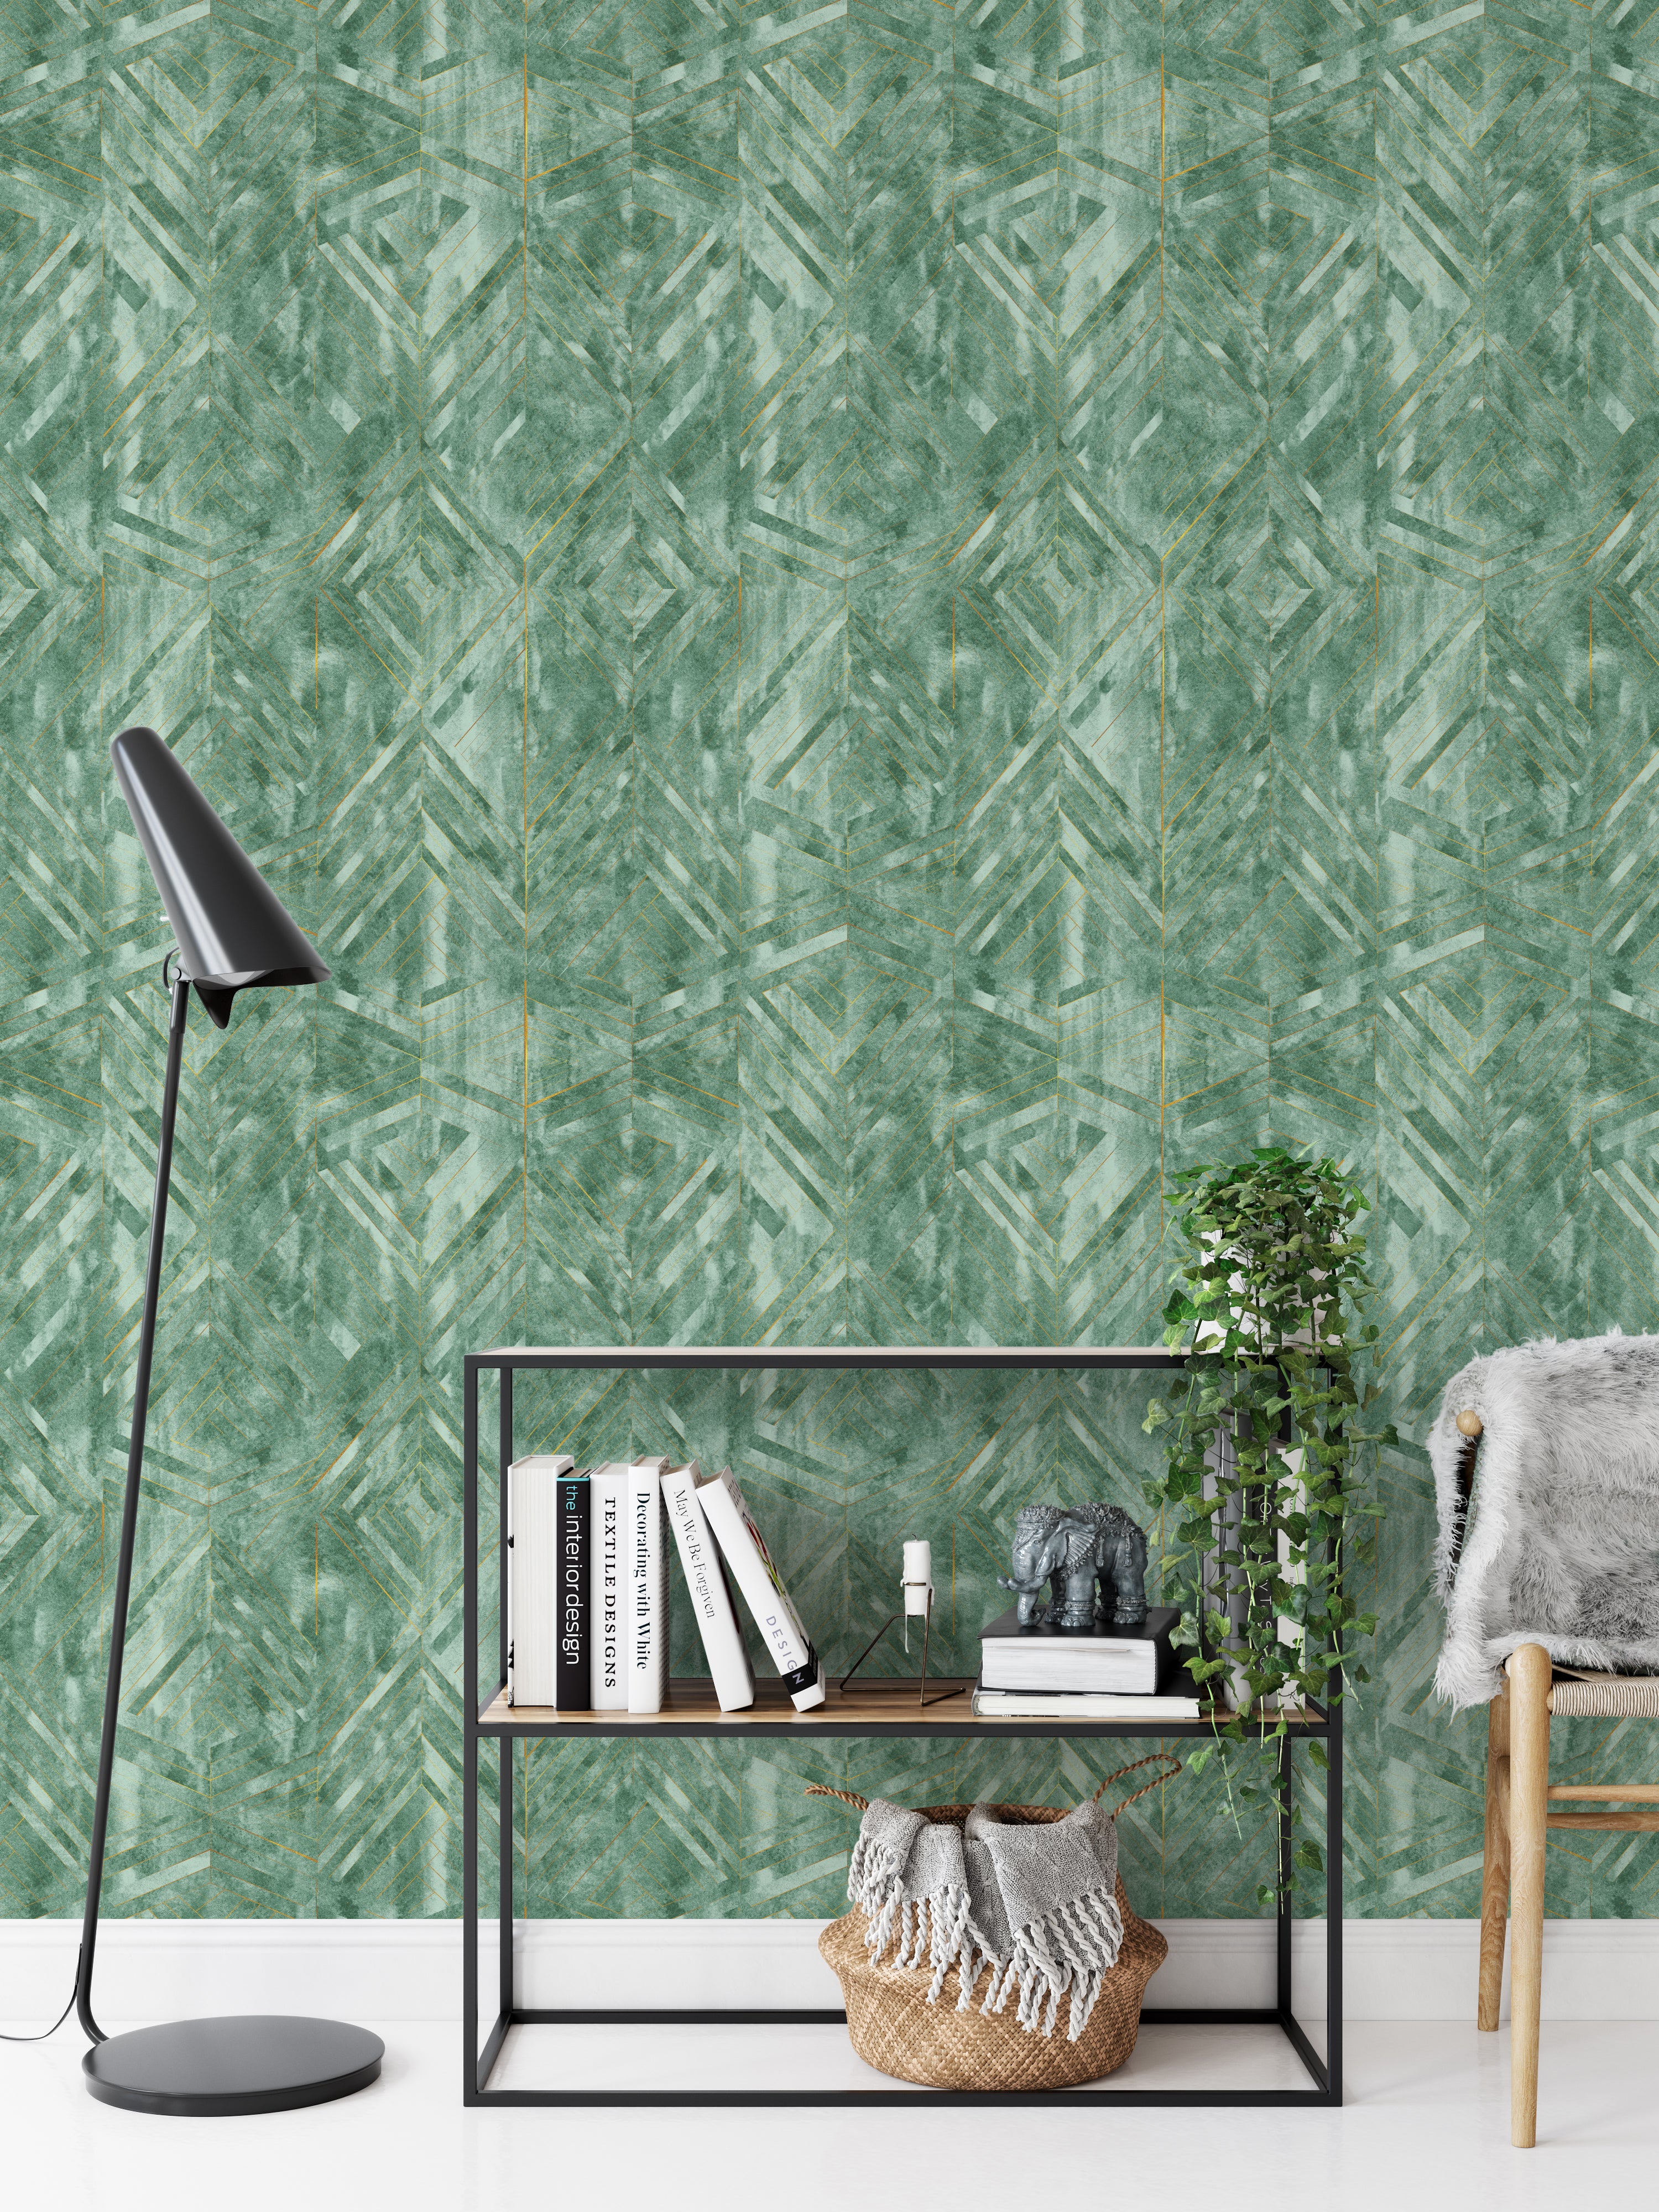 Gemini Wallpaper - The Clements Crew Line from WALL BLUSH